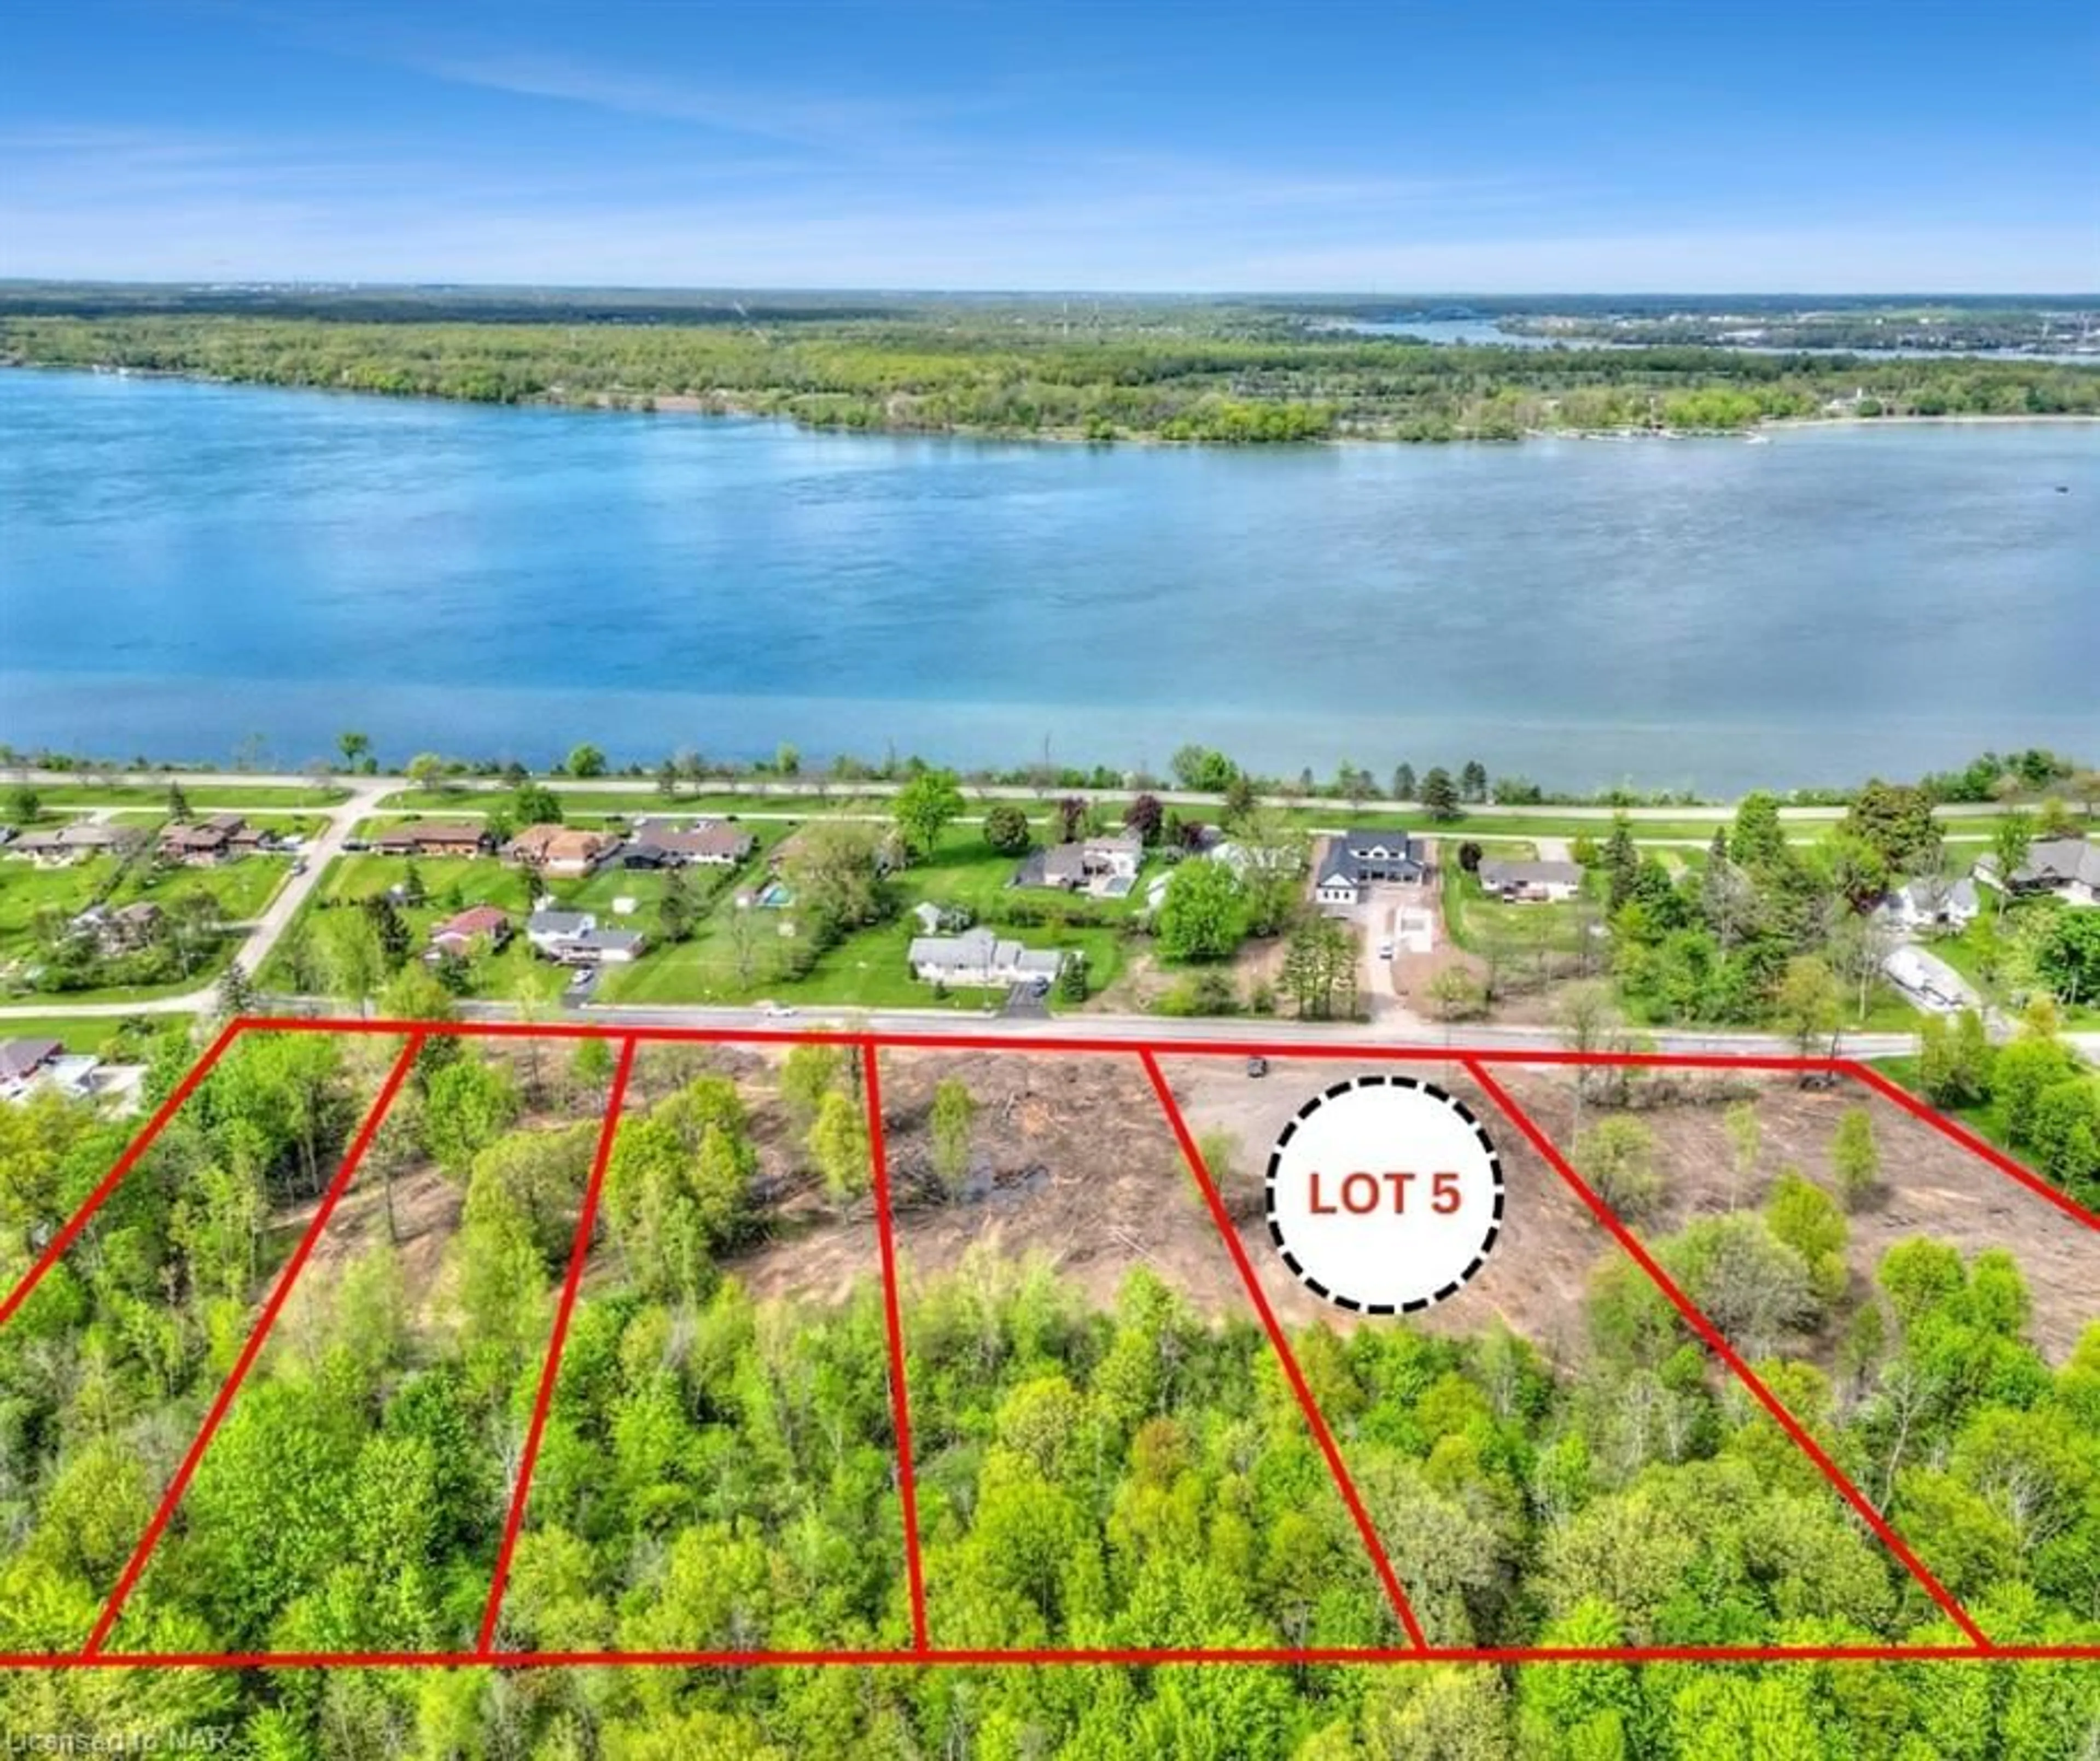 Lakeview for (LOT 5) 2136 Houck Cres, Fort Erie Ontario L2A 5M4